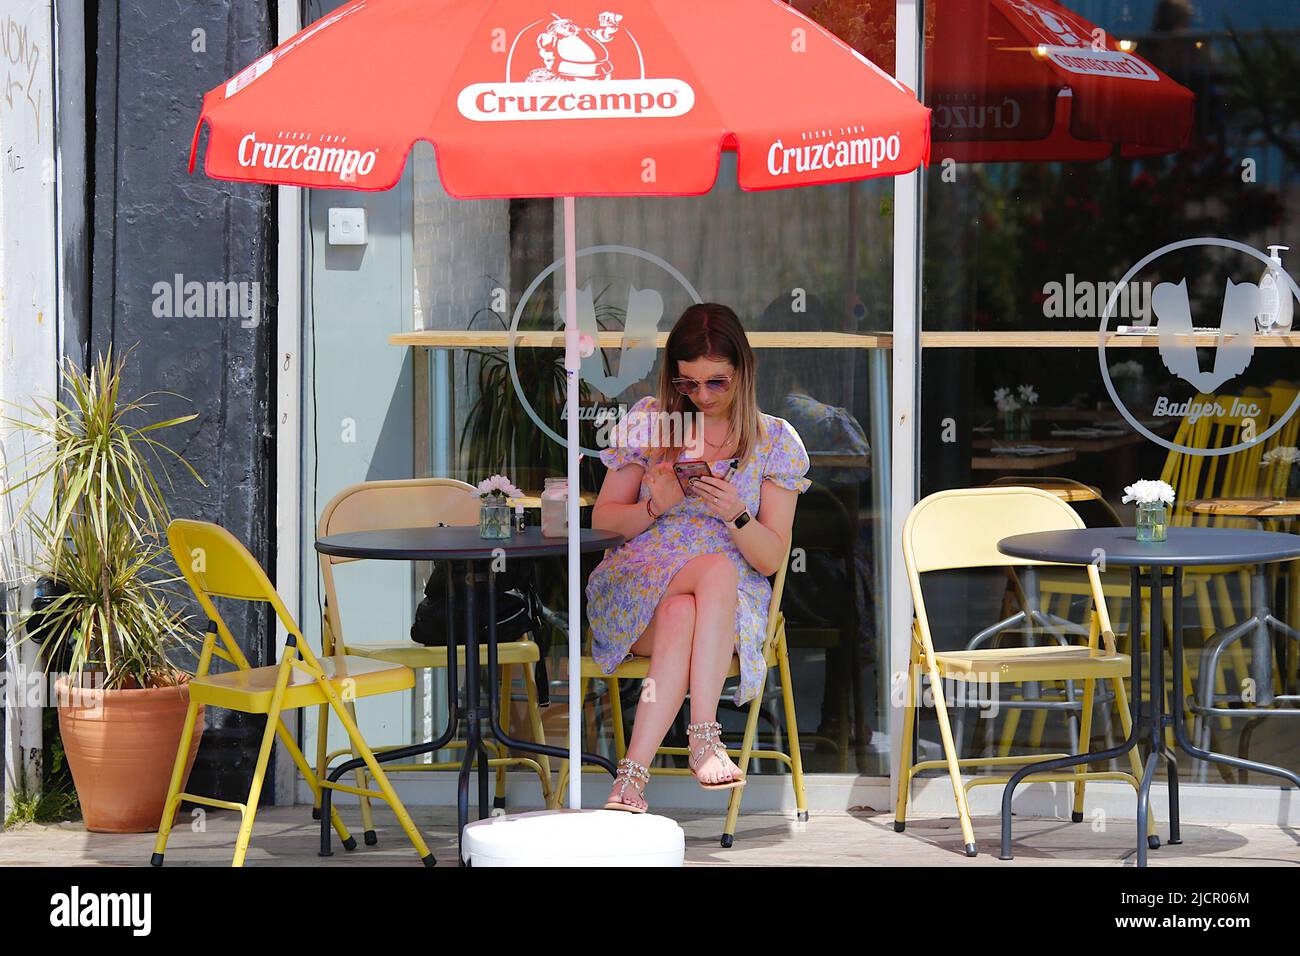 Hastings, East Sussex, UK. 15 Jun, 2022. UK Weather: Hot and sunny at the seaside town of Hastings in East Sussex as Brits enjoy the warm weather today along the seafront promenade. A young woman sits in the shade enjoying a drink. Photo Credit: Paul Lawrenson /Alamy Live News Stock Photo